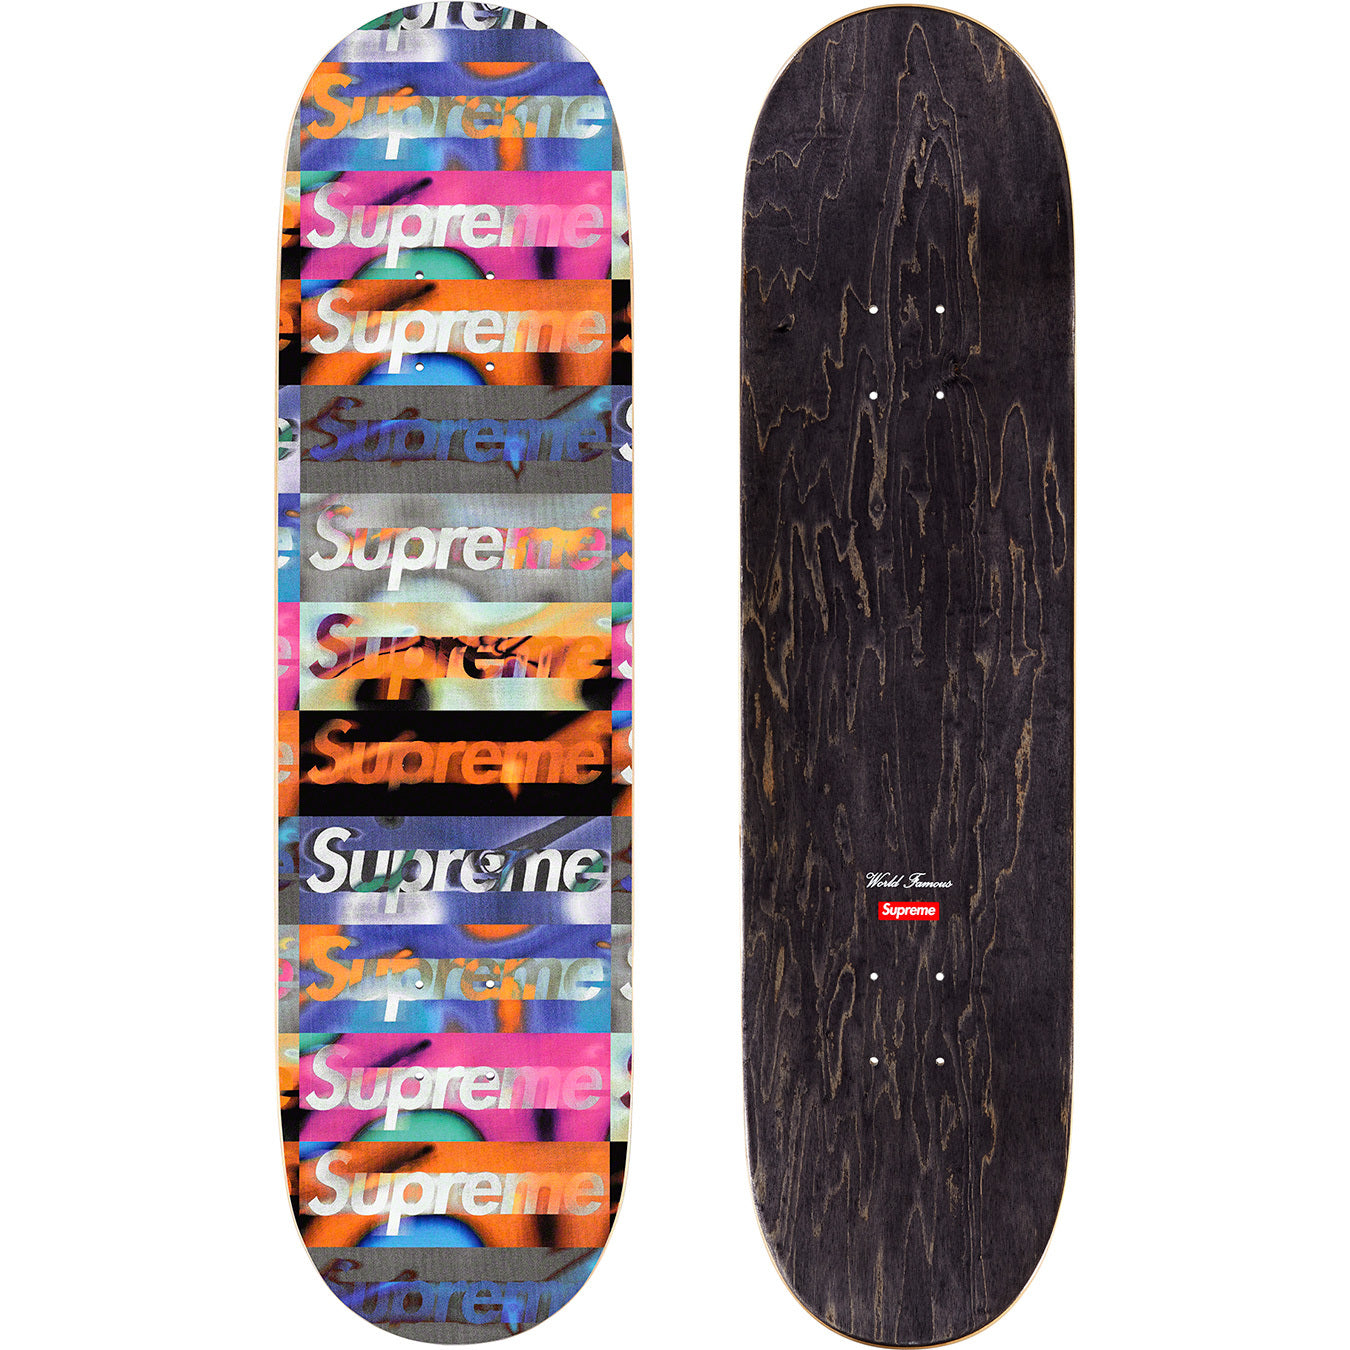 Supreme Distorted Logo Skateboard by Supreme from £110.00